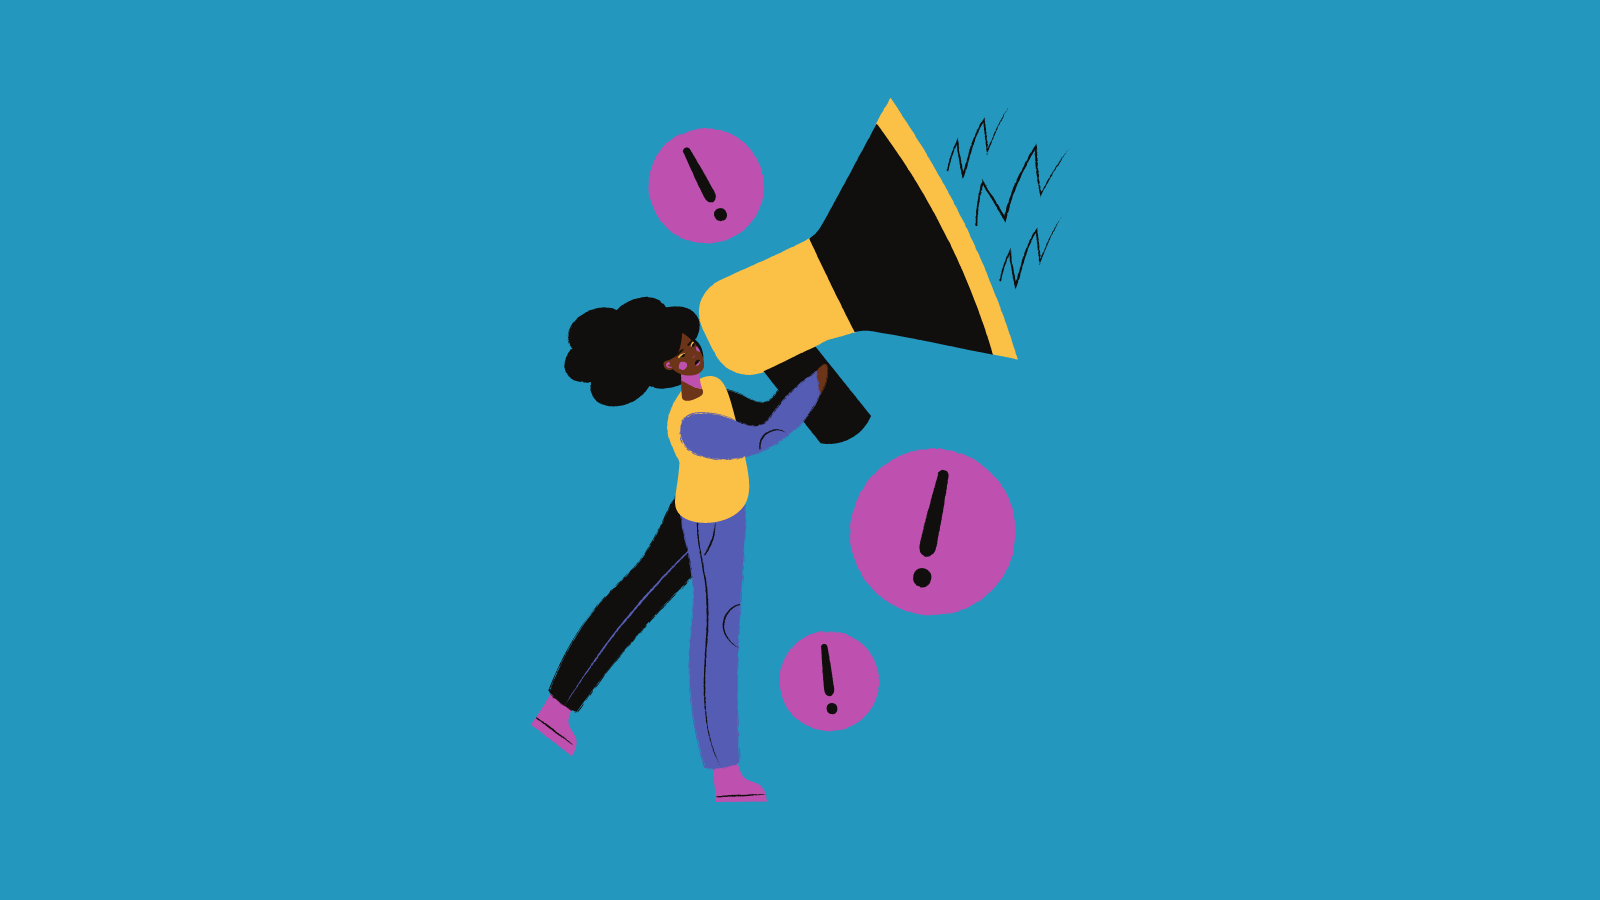 A woman with a comically large megaphone